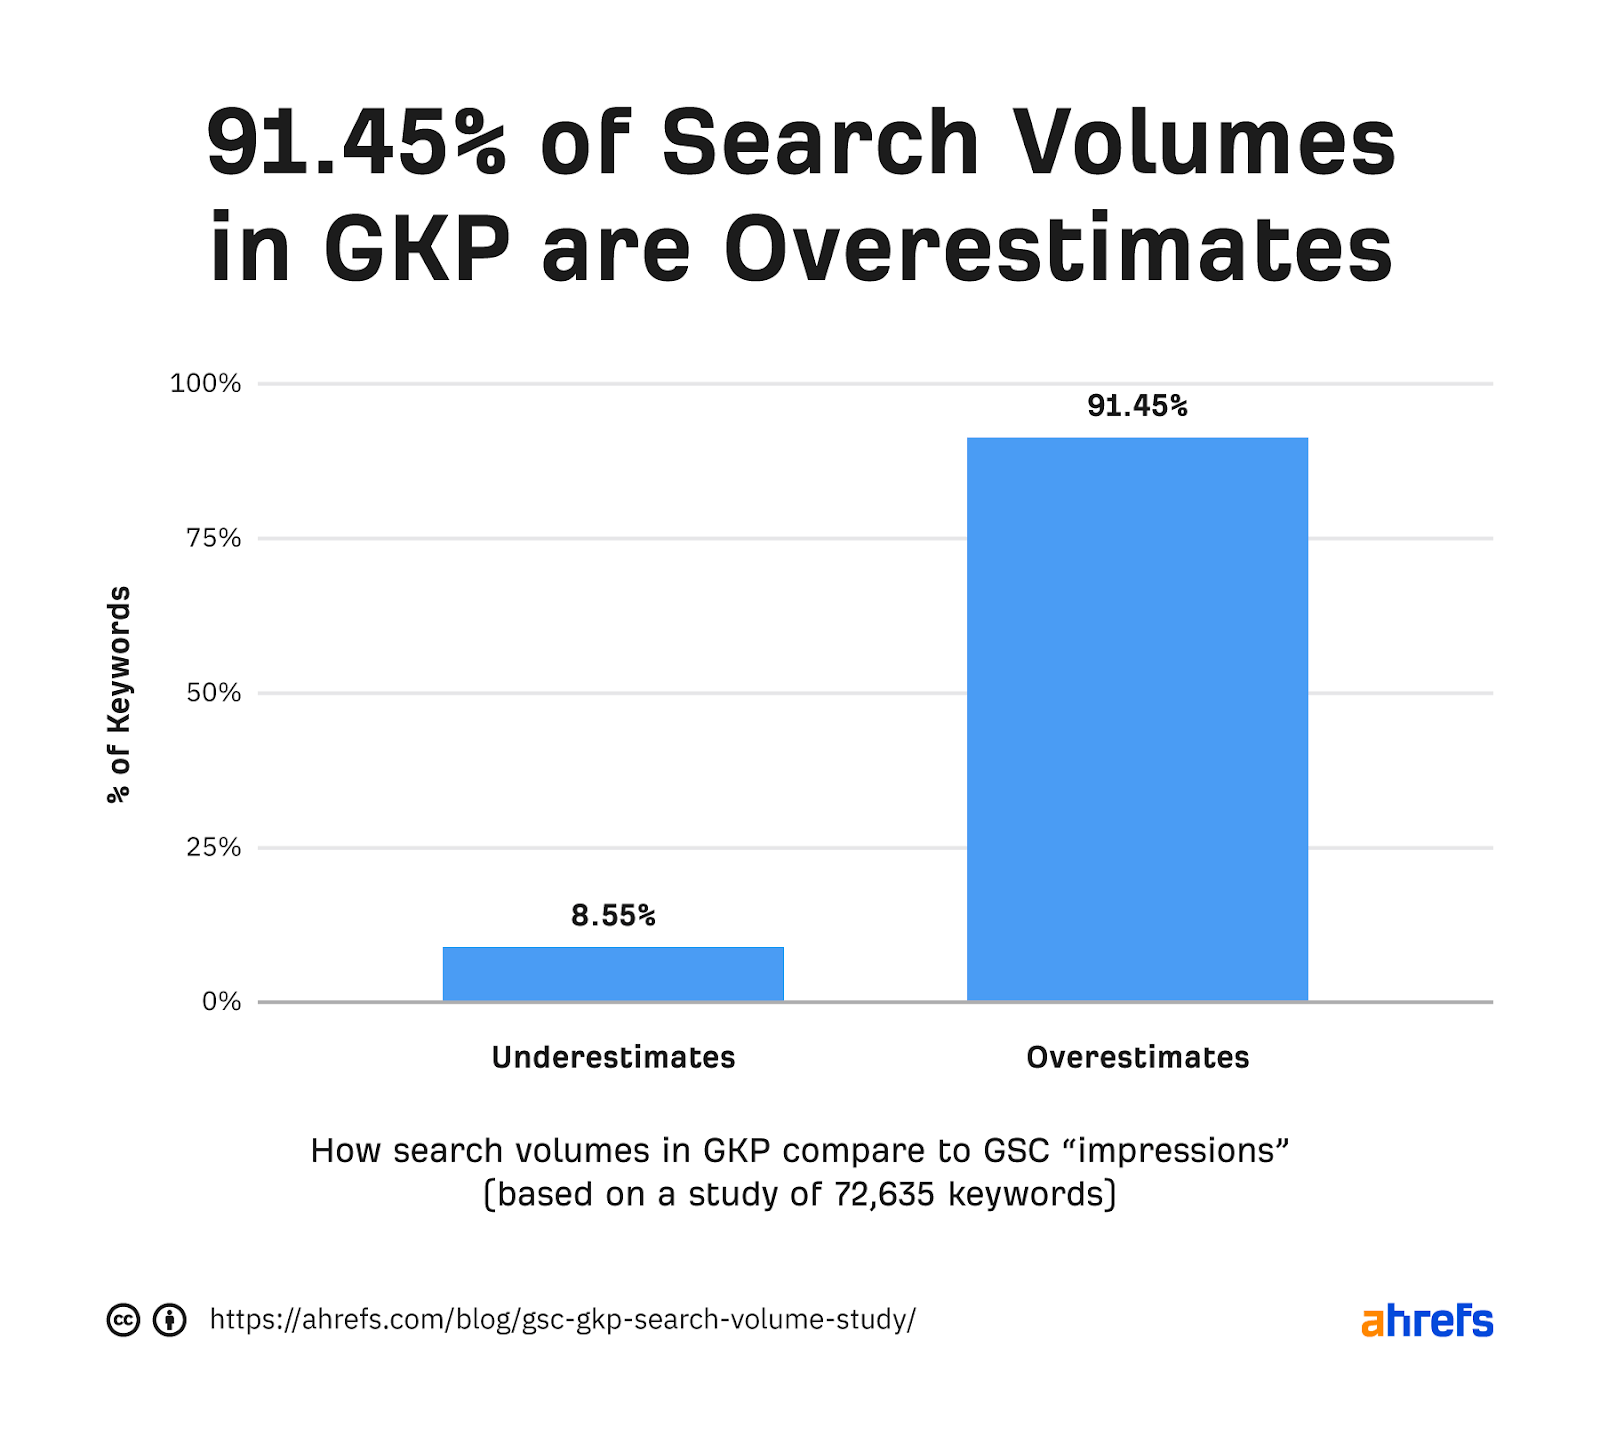 Bar chart showing 91.45% of search volumes in GKP are overestimates 